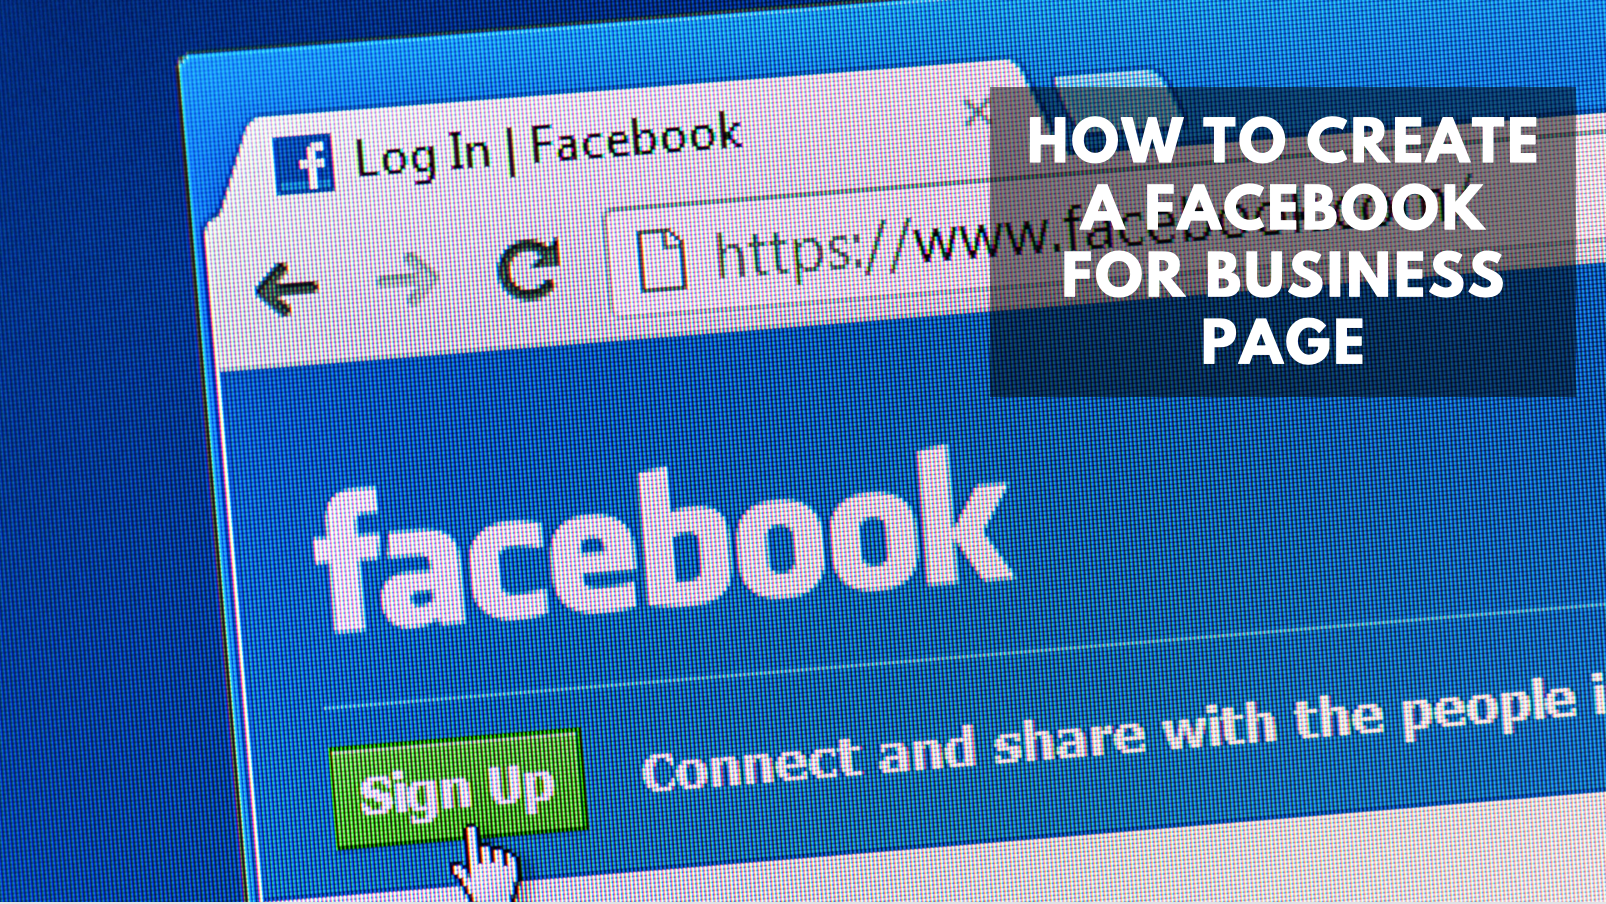 How to Create a Facebook for Business Page